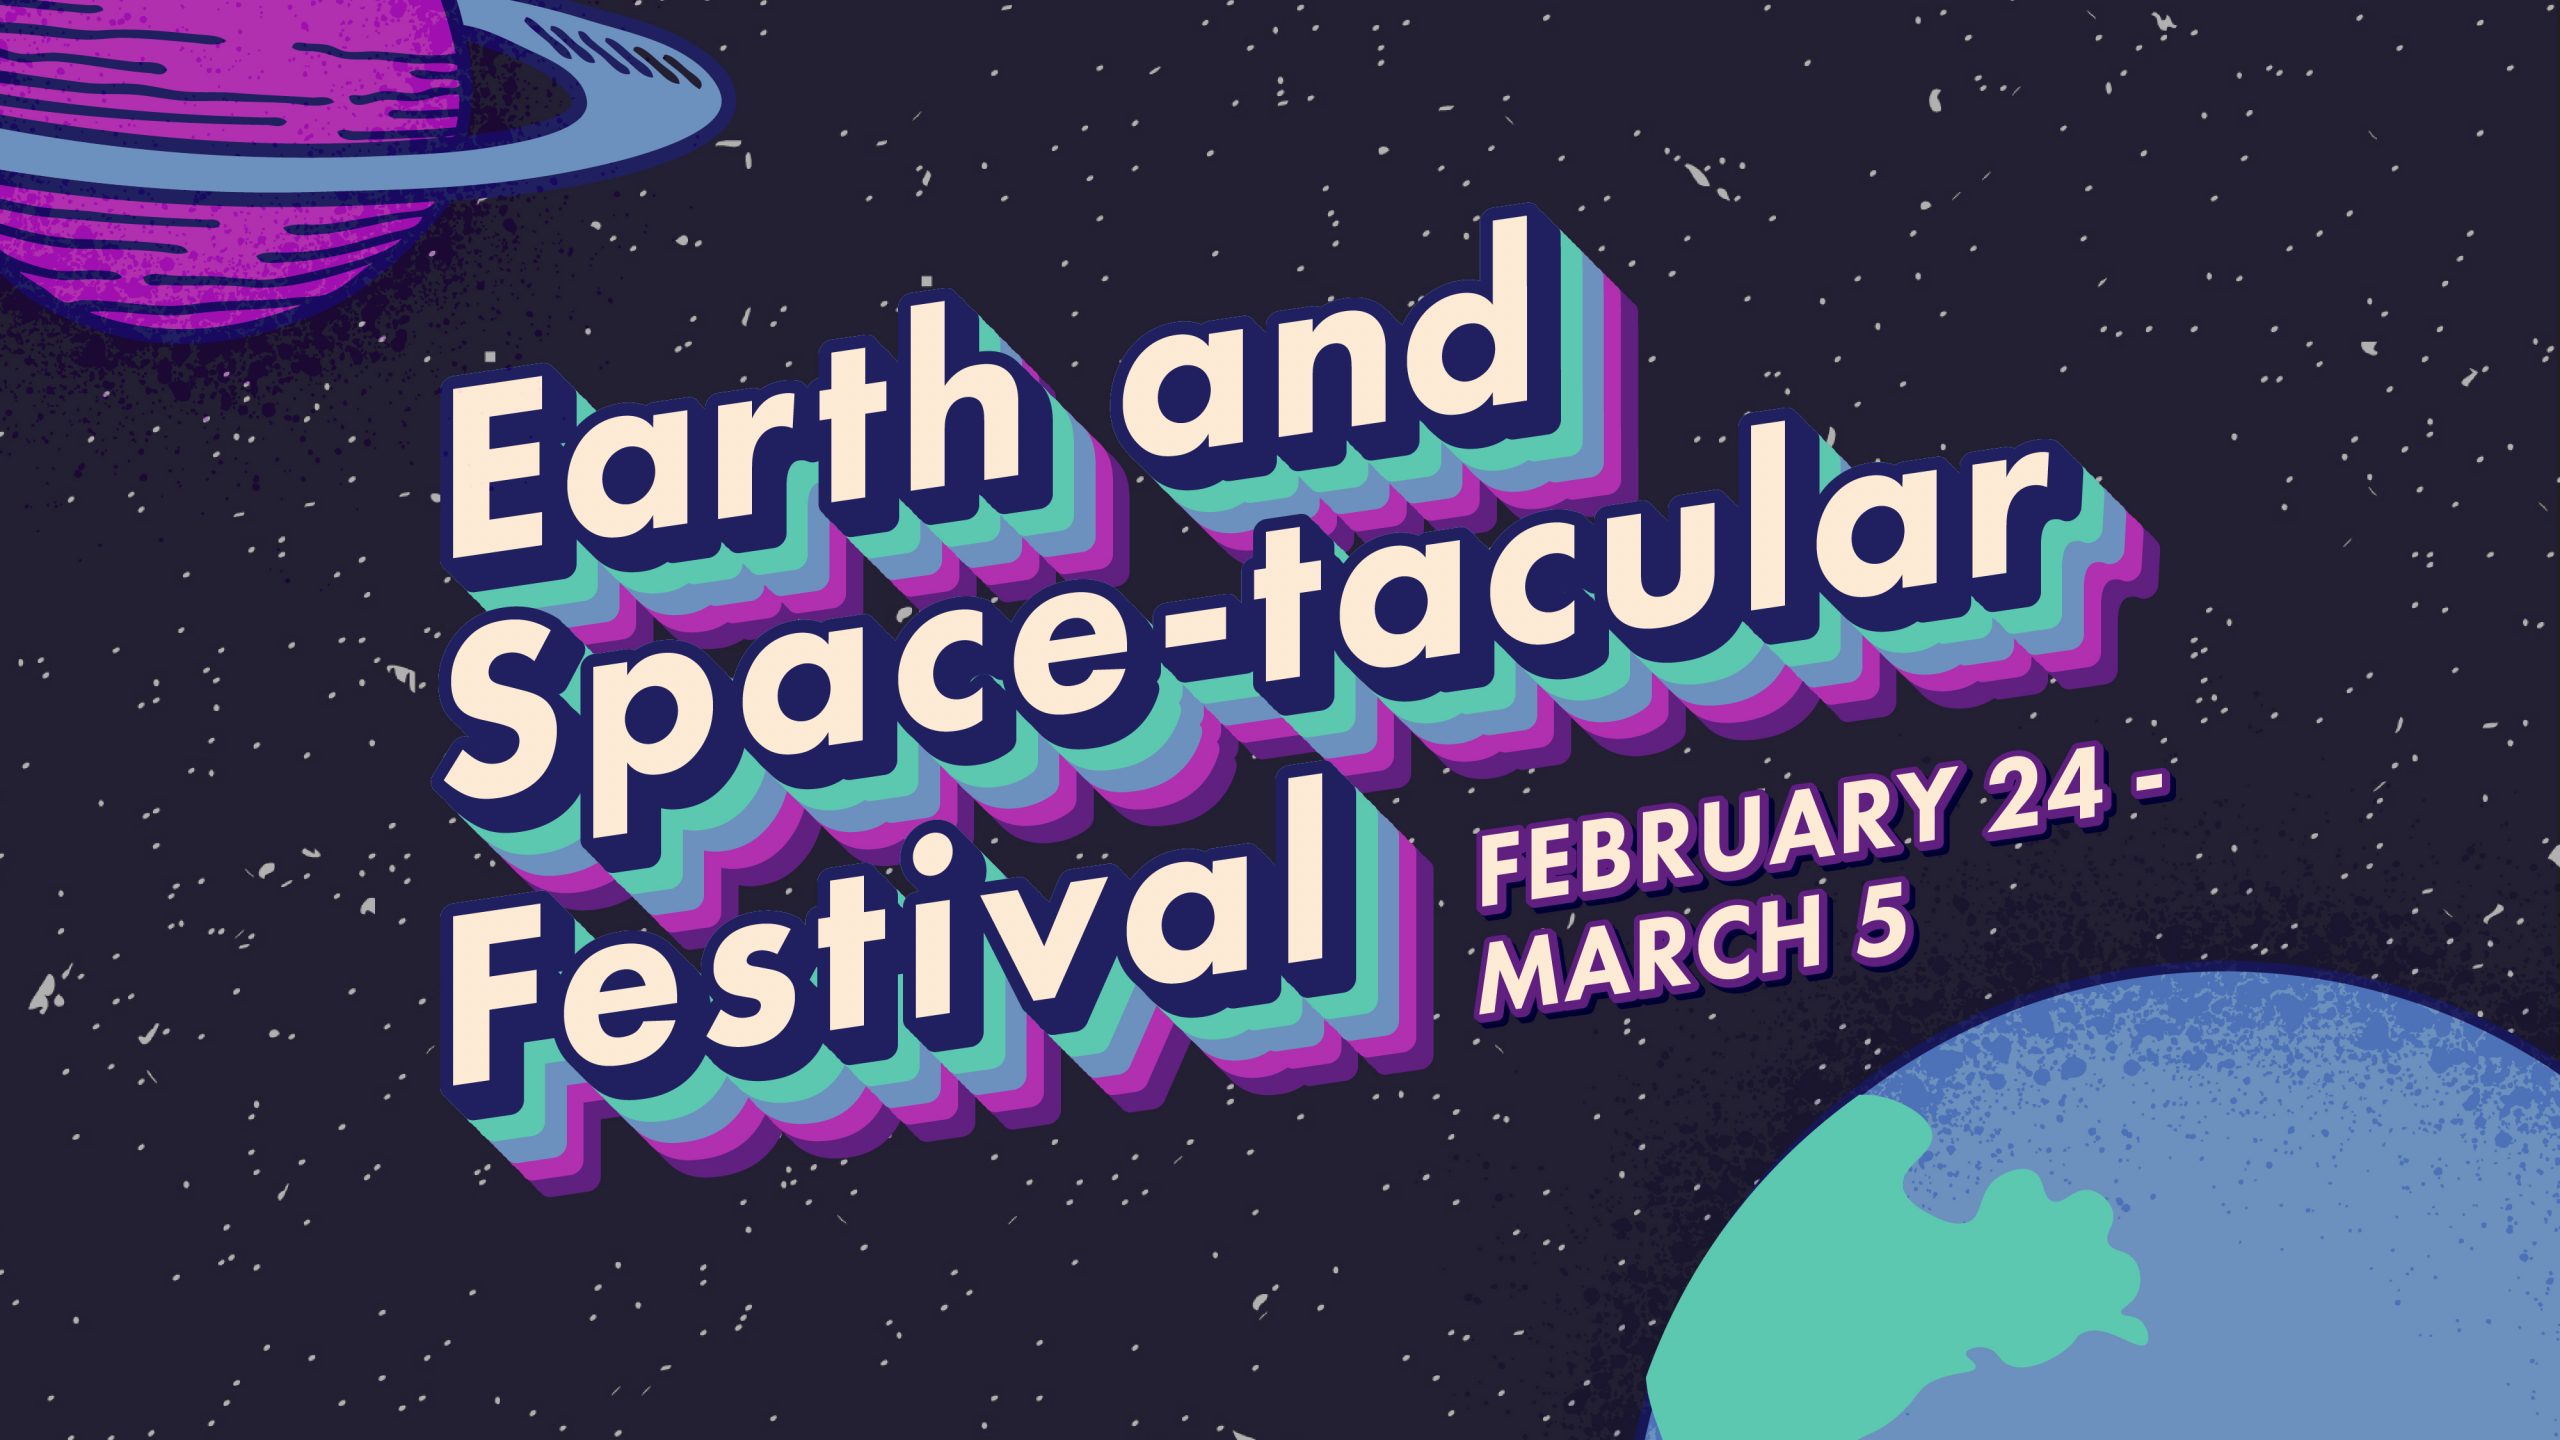 Retro-style graphic of planets with text that reads "Earth and Space-tacular Festival February 24 – March 5"